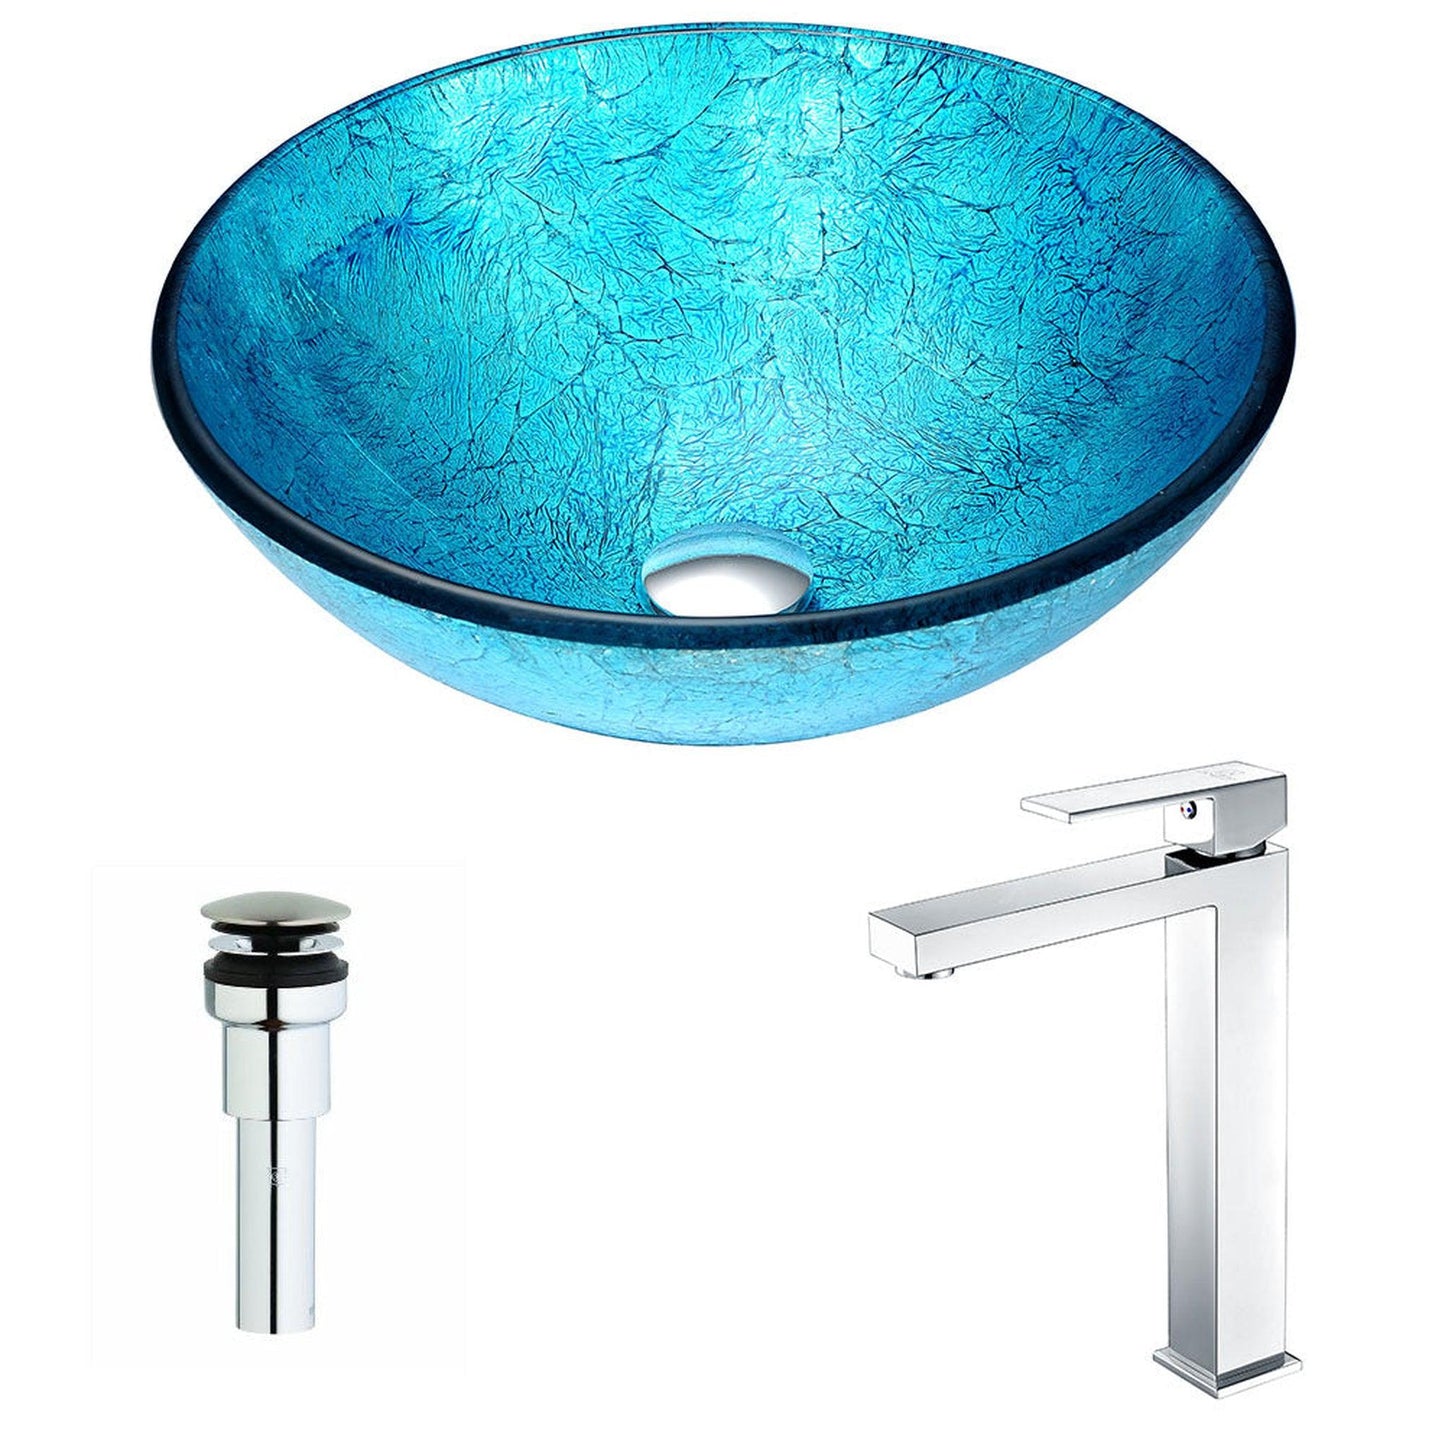 ANZZI Accent Series 17" x 17" Round Blue Ice Deco-Glass Vessel Sink With Polished Chrome Pop-Up Drain and Enti Faucet